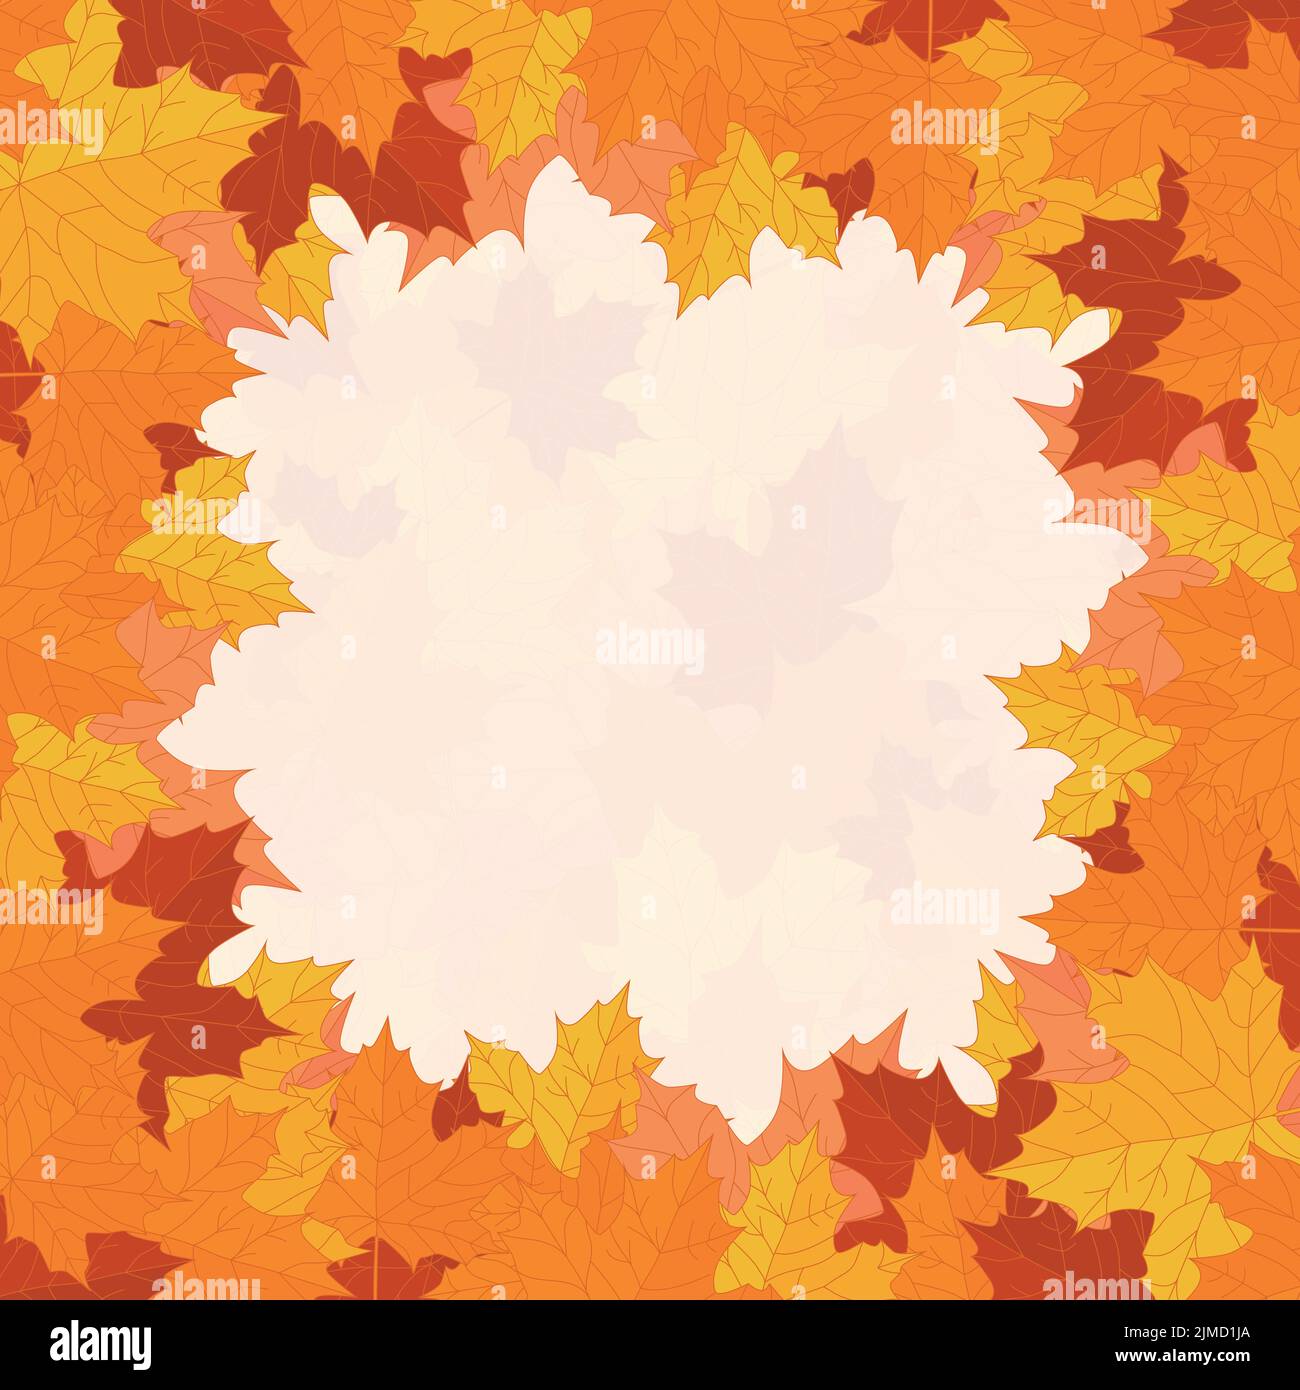 Natural background, autumn or fall frame, fallen leaves in warm colours, red, orange, and yellow. Seasonal bright design with copy space. Stock Vector